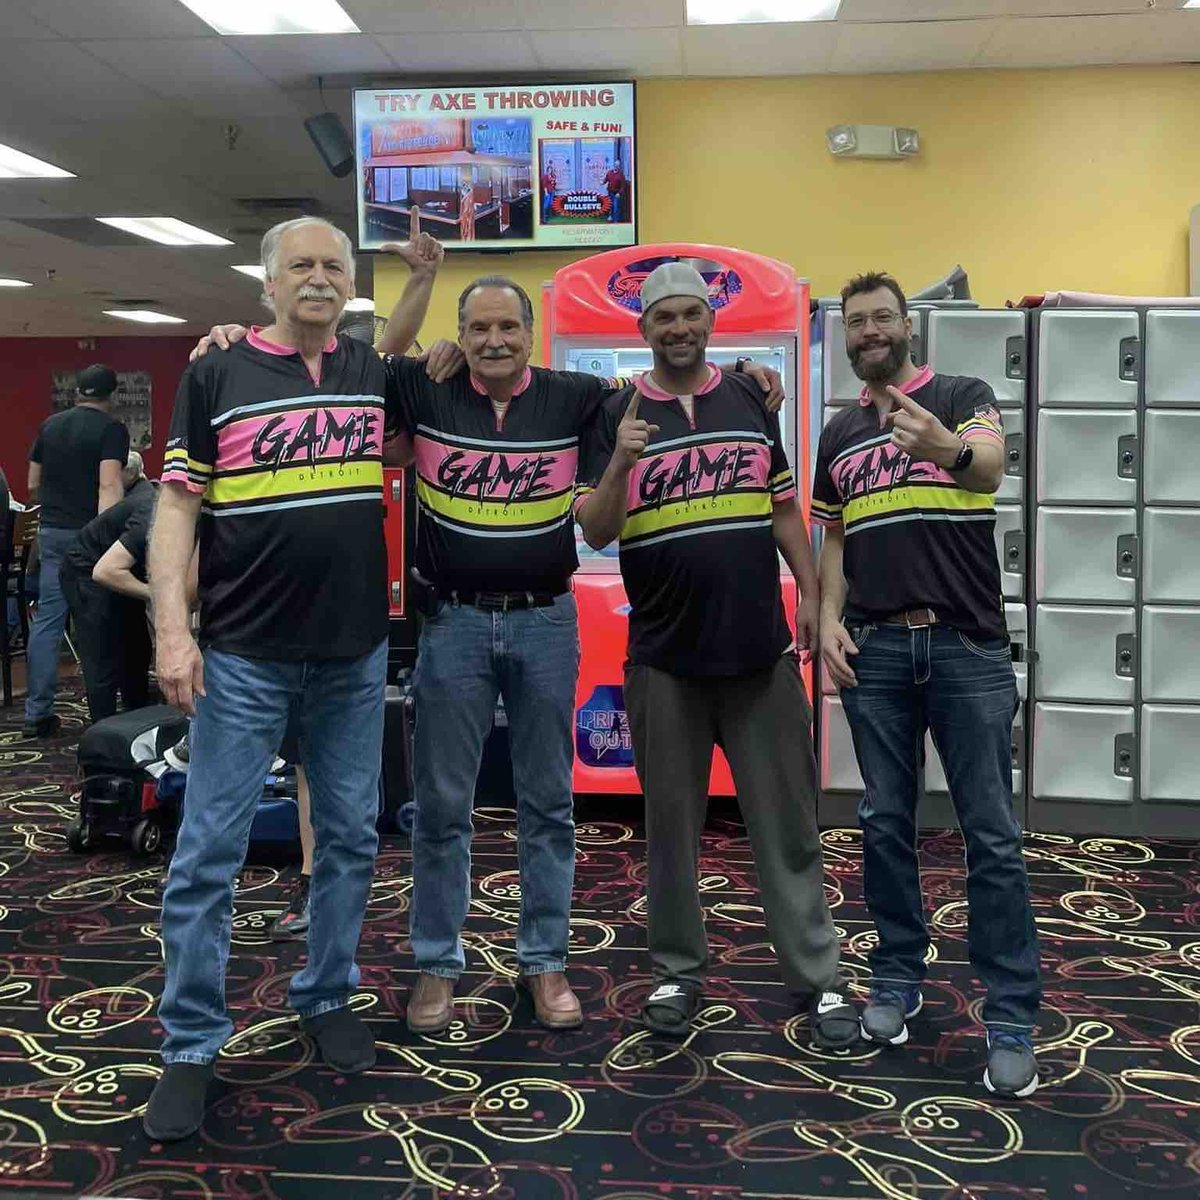 TEAM GAME!!! Back-to-back Bowling Champs⭐️ #PoweredByG #LookGoodPlayGood #WinnersCircle #GameBrand #TeamGear #Unrivaled #WelcomeToTheShow #AmericanMade #GameApparel #GBRAND